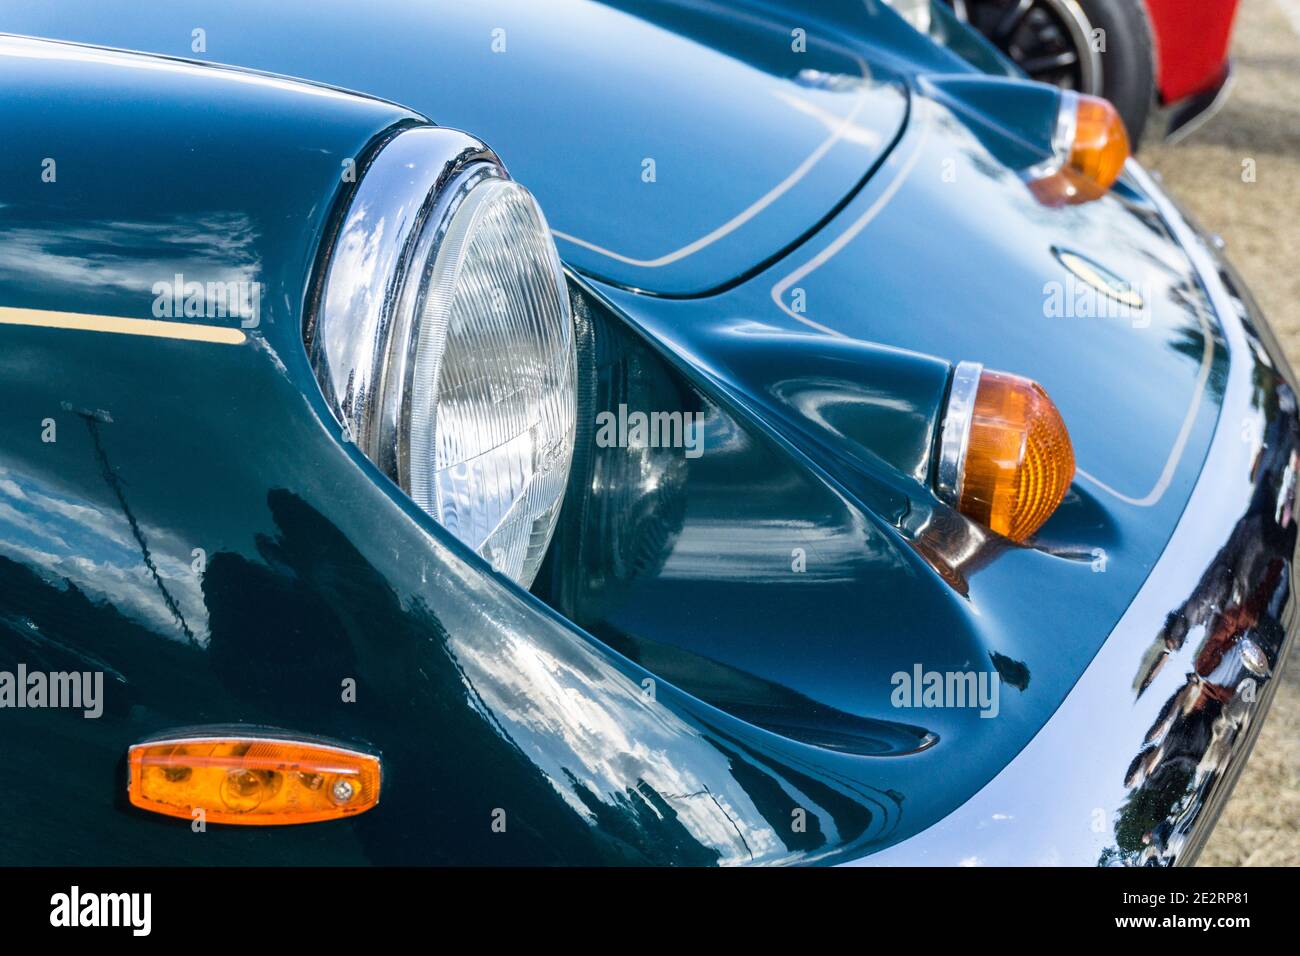 Close up detail of the headlights and bonnet of a 1972 British racing green Lotus Europa Special classic sports car Stock Photo